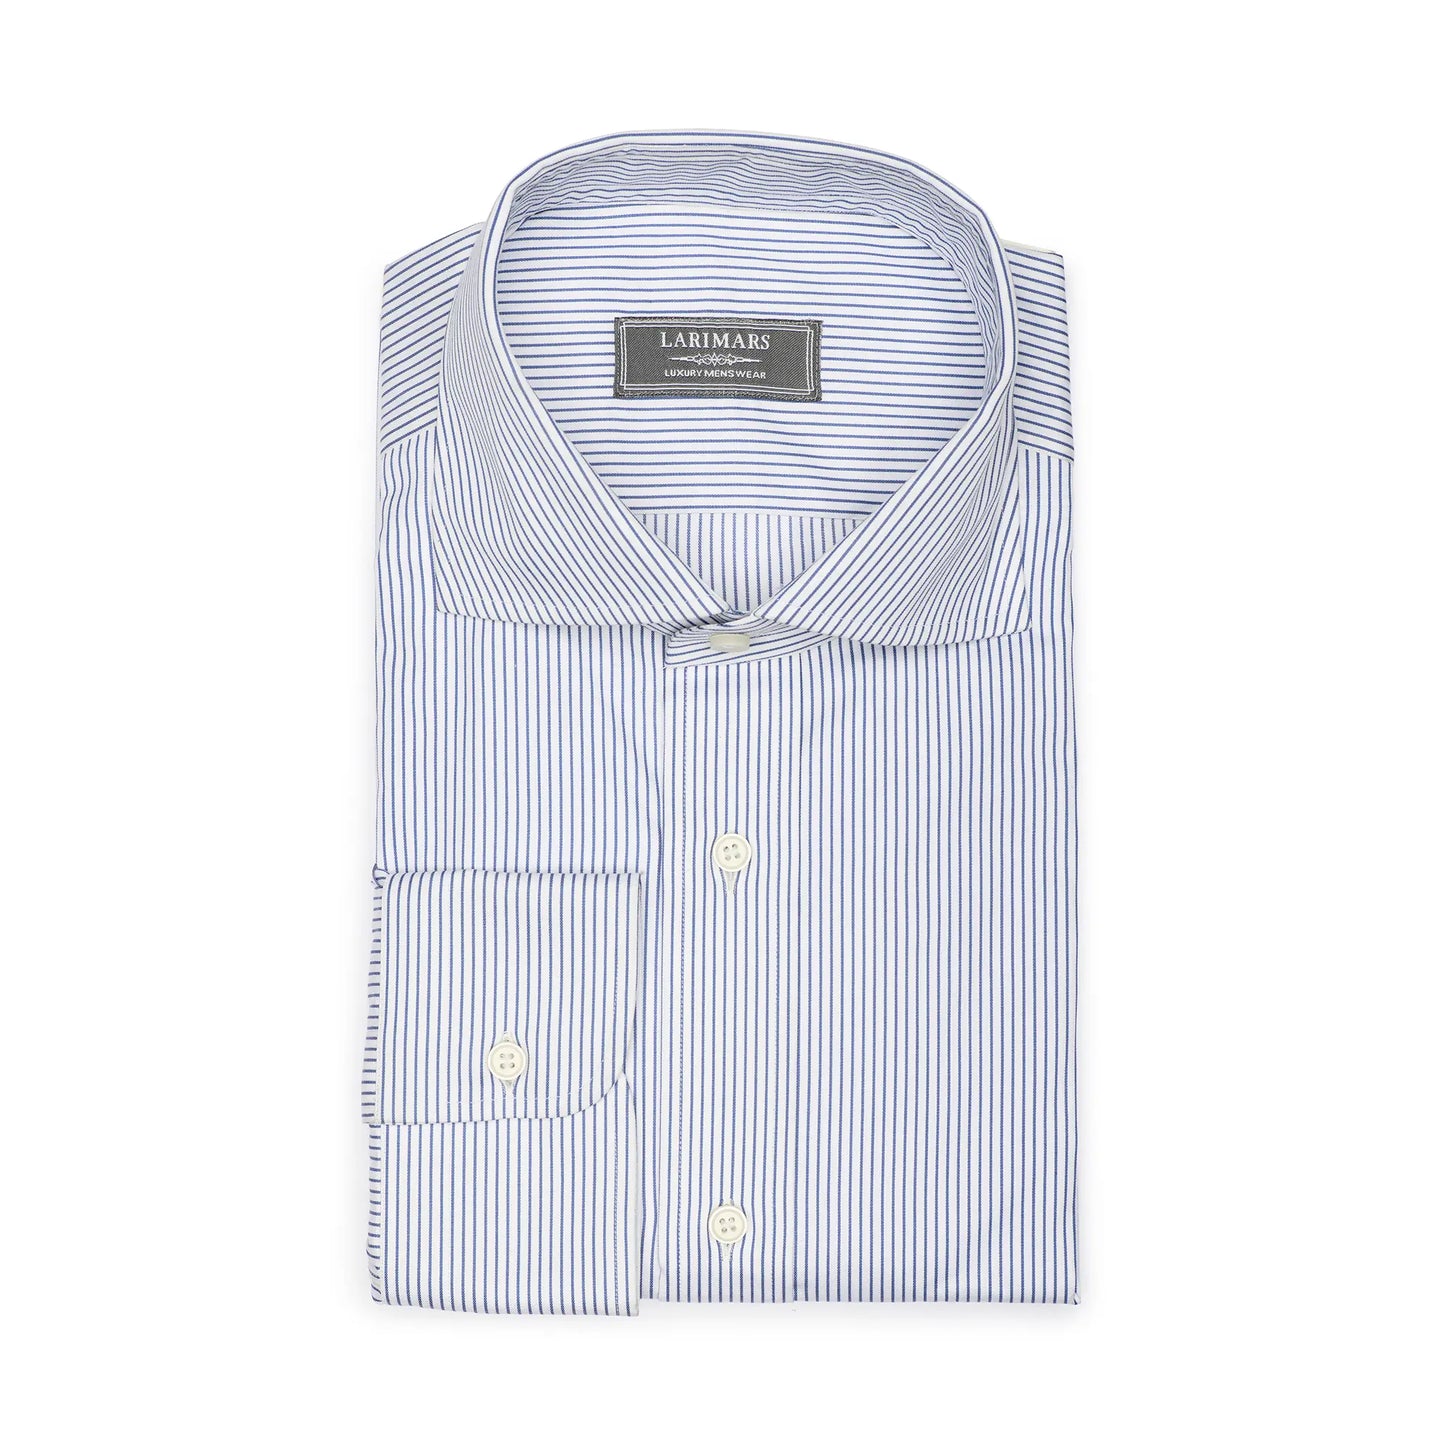 Blue & White Stripe - Larimars Clothing Men's Formal and casual wear shirts